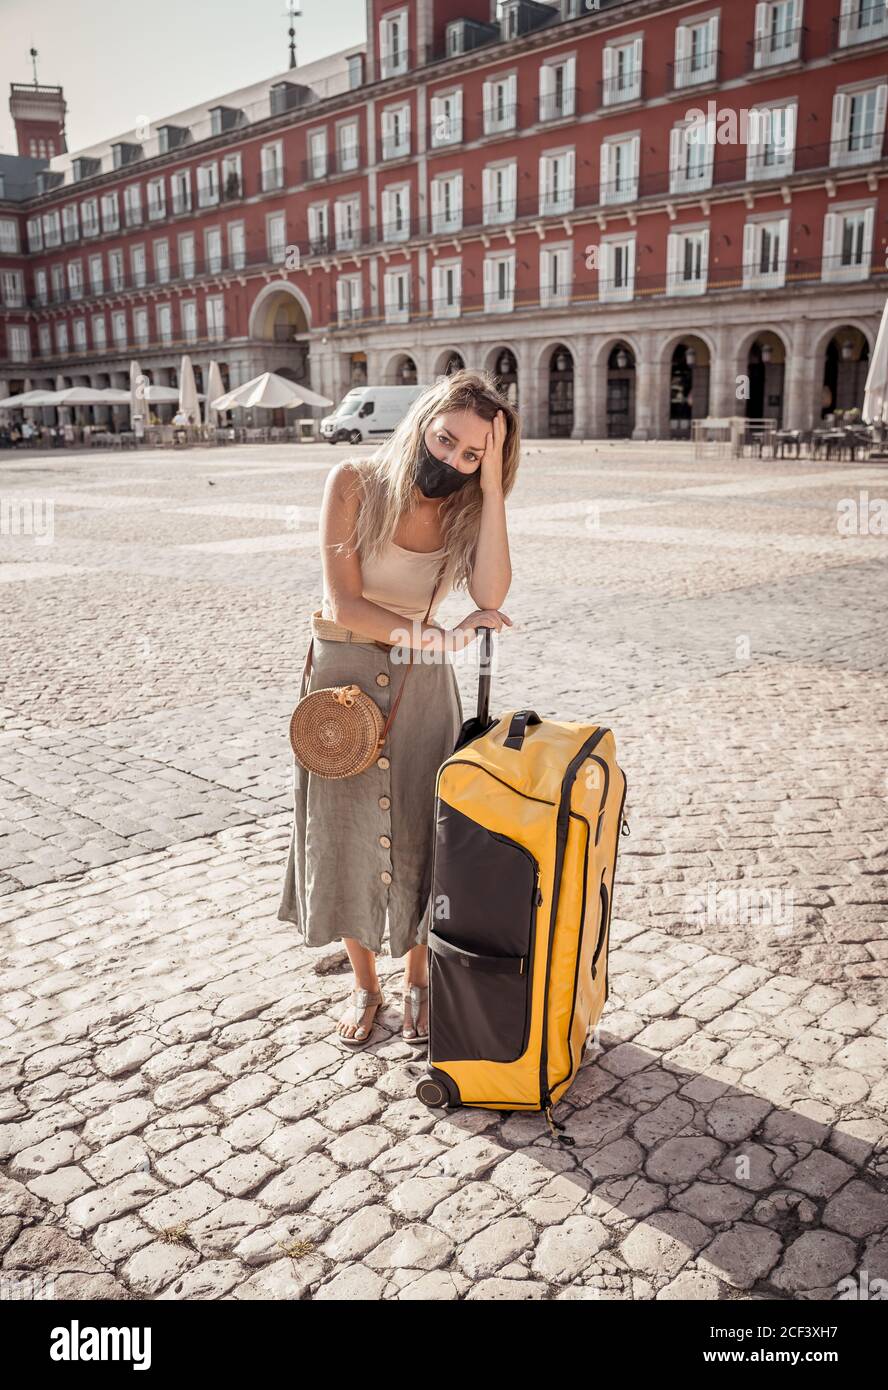 COVID-19 impact in tourism. Sad tourist wearing protective mask in Madrid Spain worried about coronavirus quarantine amid travel regulations. Vacation Stock Photo